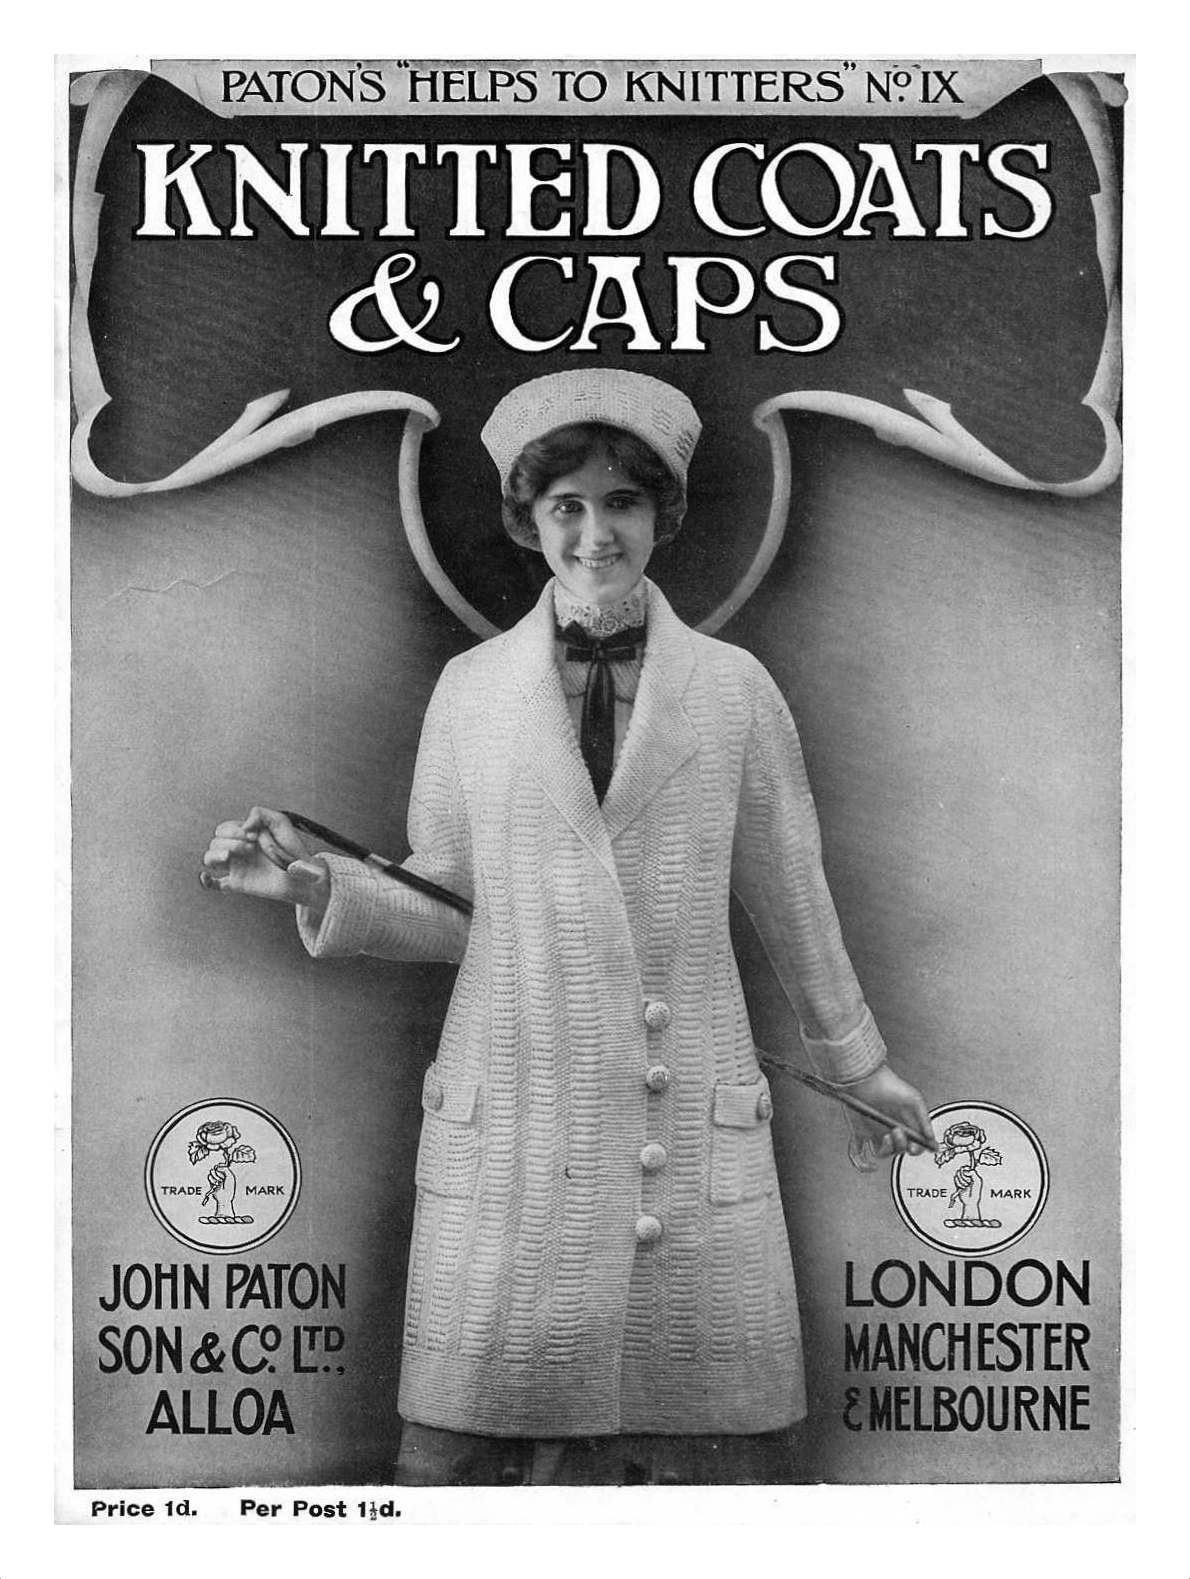 Knitted Coats & Caps - Lady wth coat and hat